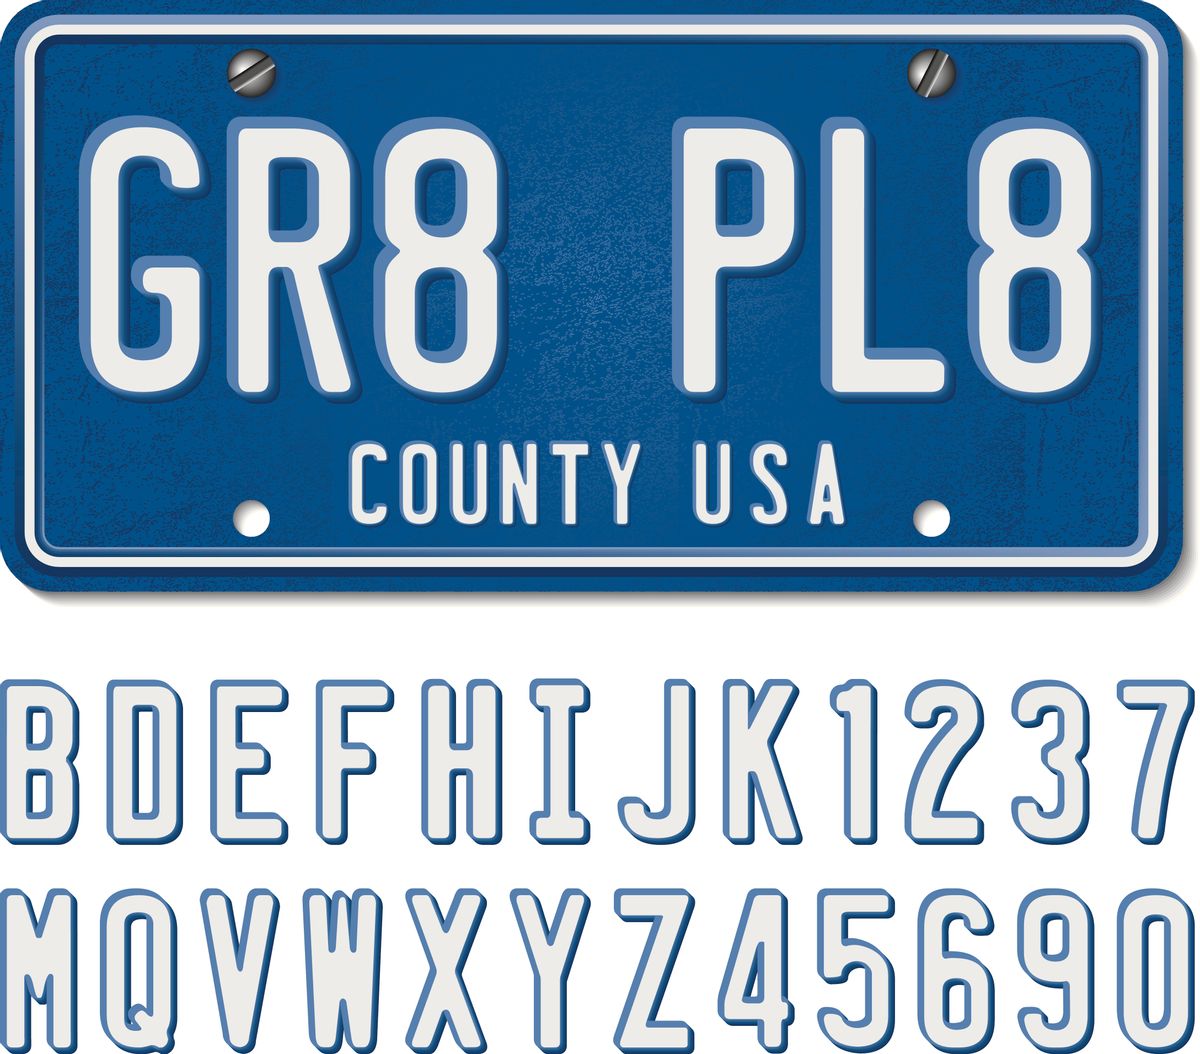 Drag and scale characters to make your own vanity plate. Includes all the letters of the alphabet and numerals 0 through 9. Elements are layered and labeled. Uses global colors for easier color changes. Download includes XXXL JPEG file (20 in. x 17.5 in. at 300 dpi). (Getty Images)